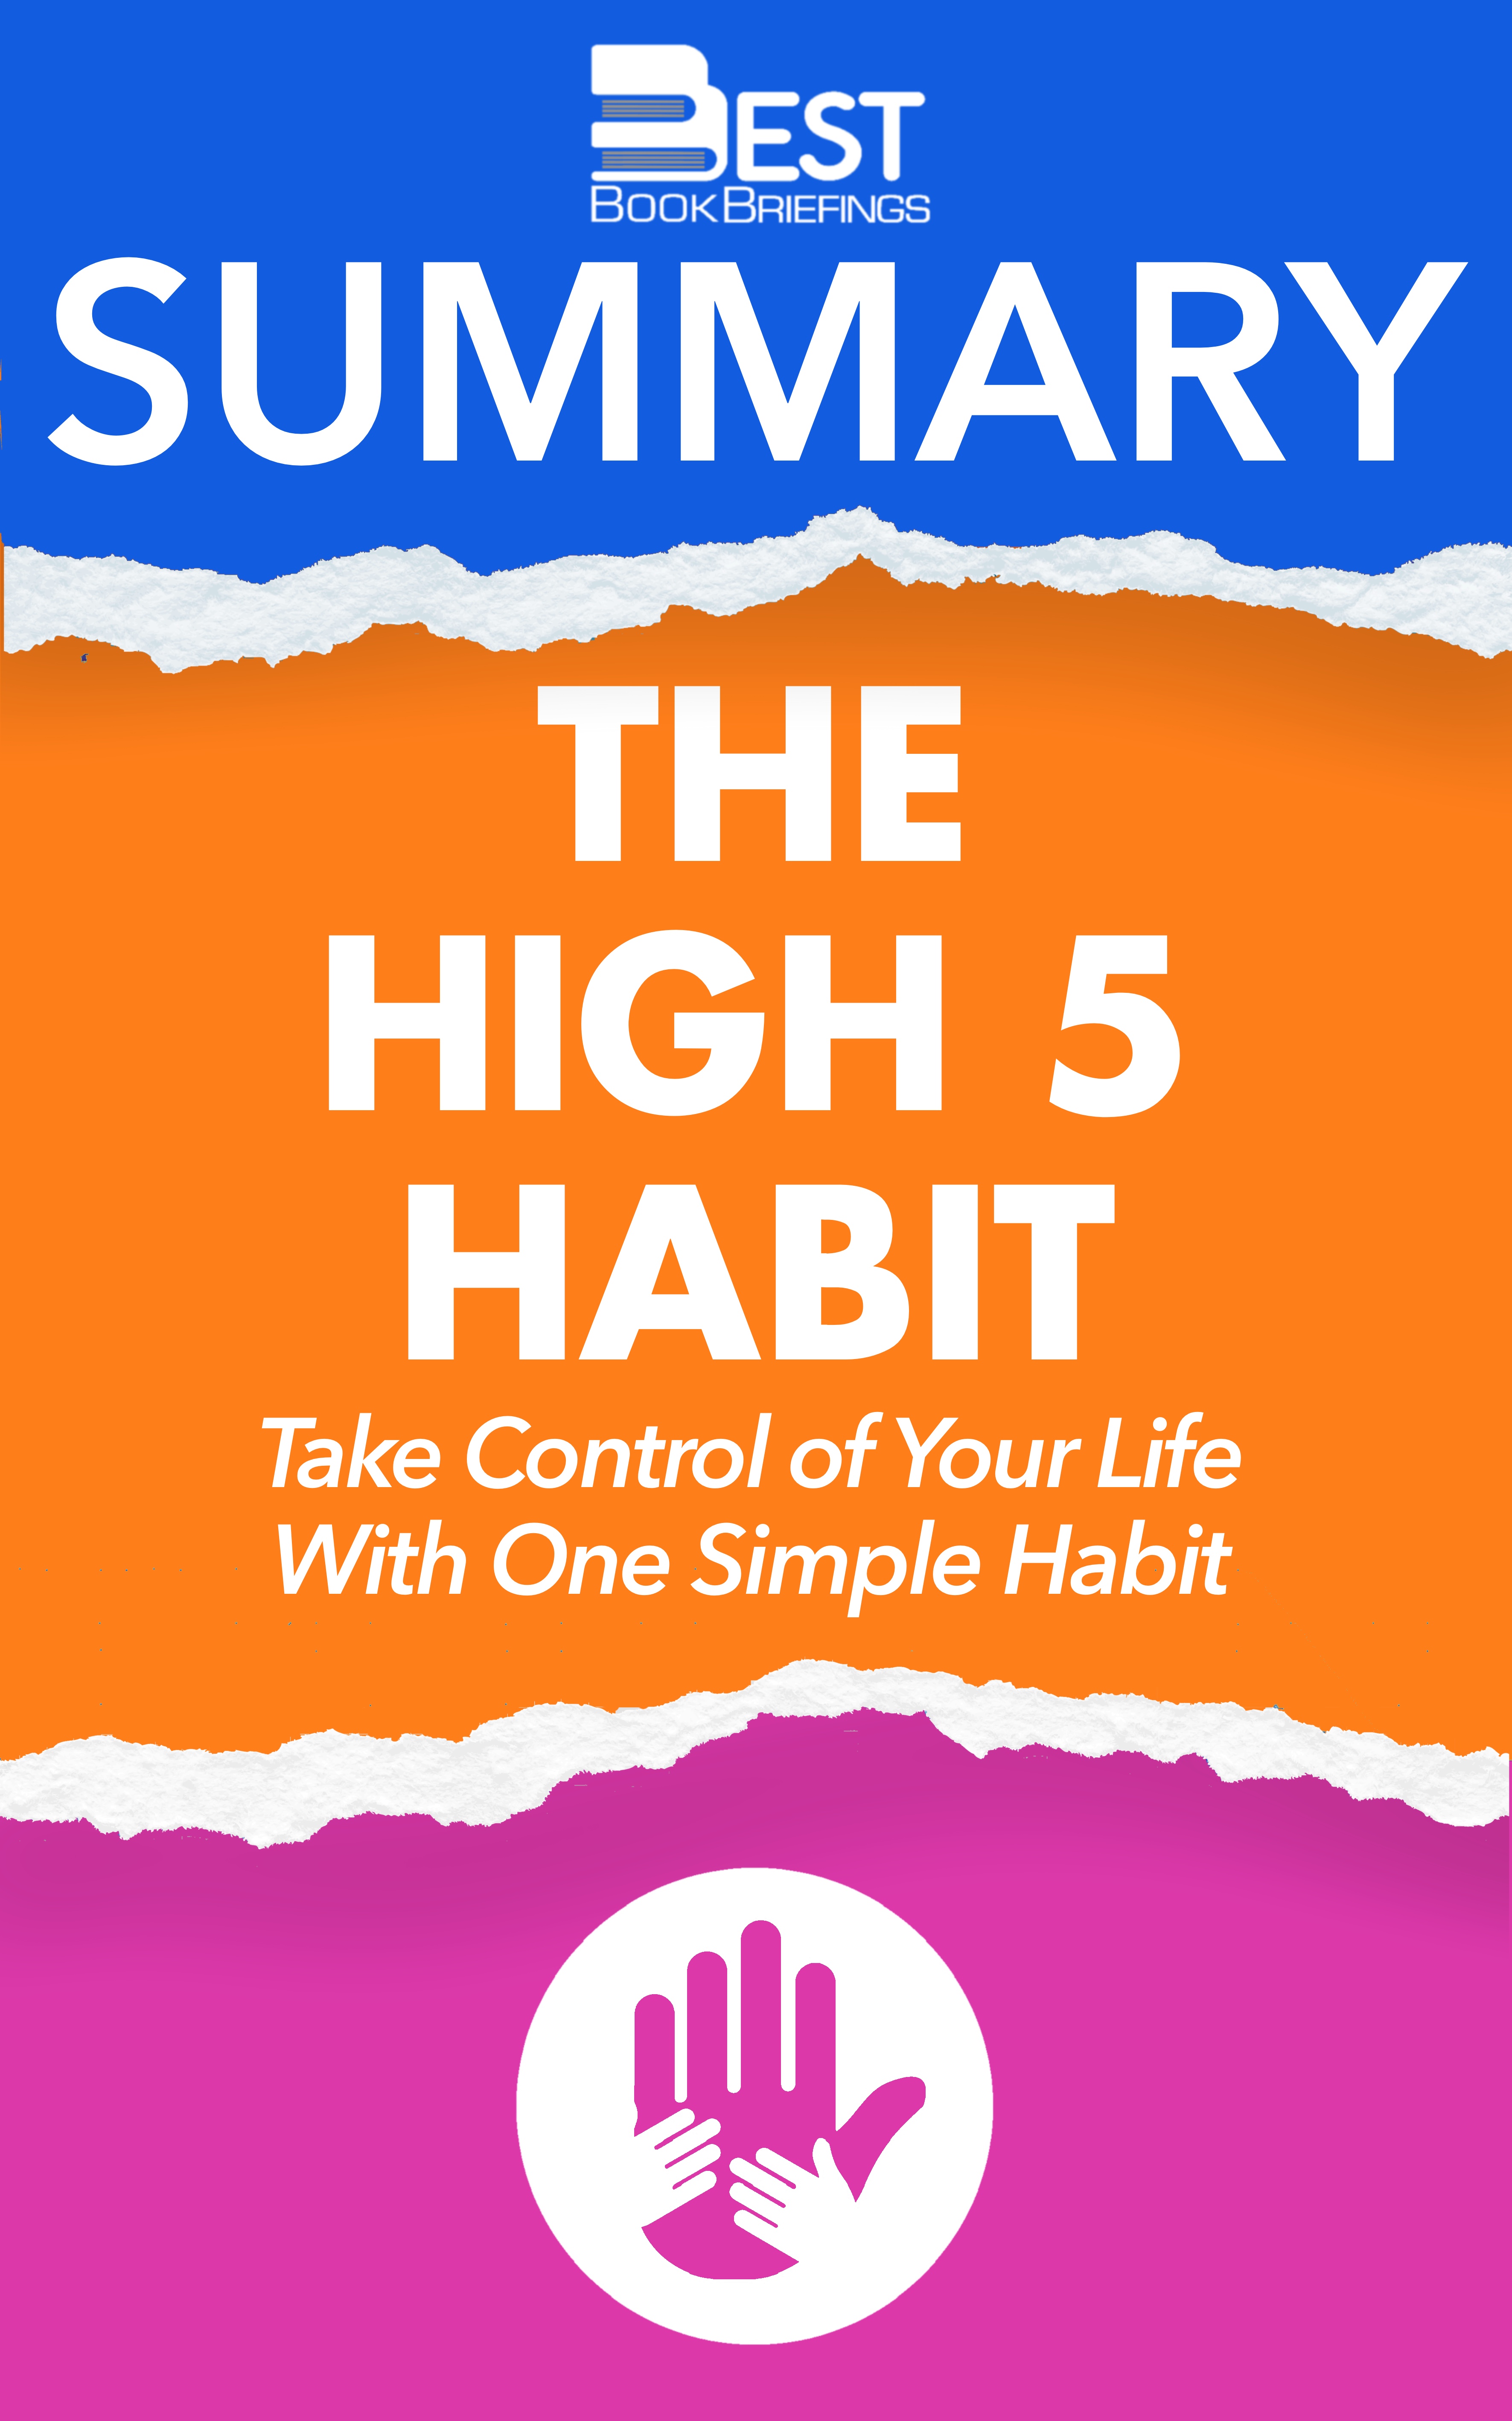 In her global phenomenon The 5 Second Rule, Mel Robbins taught millions of people around the world the five second secret to motivation. And in her latest bestseller, she shares another simple, proven tool you can use to take control of your life: The High 5 Habit.This isn’t a book about high 